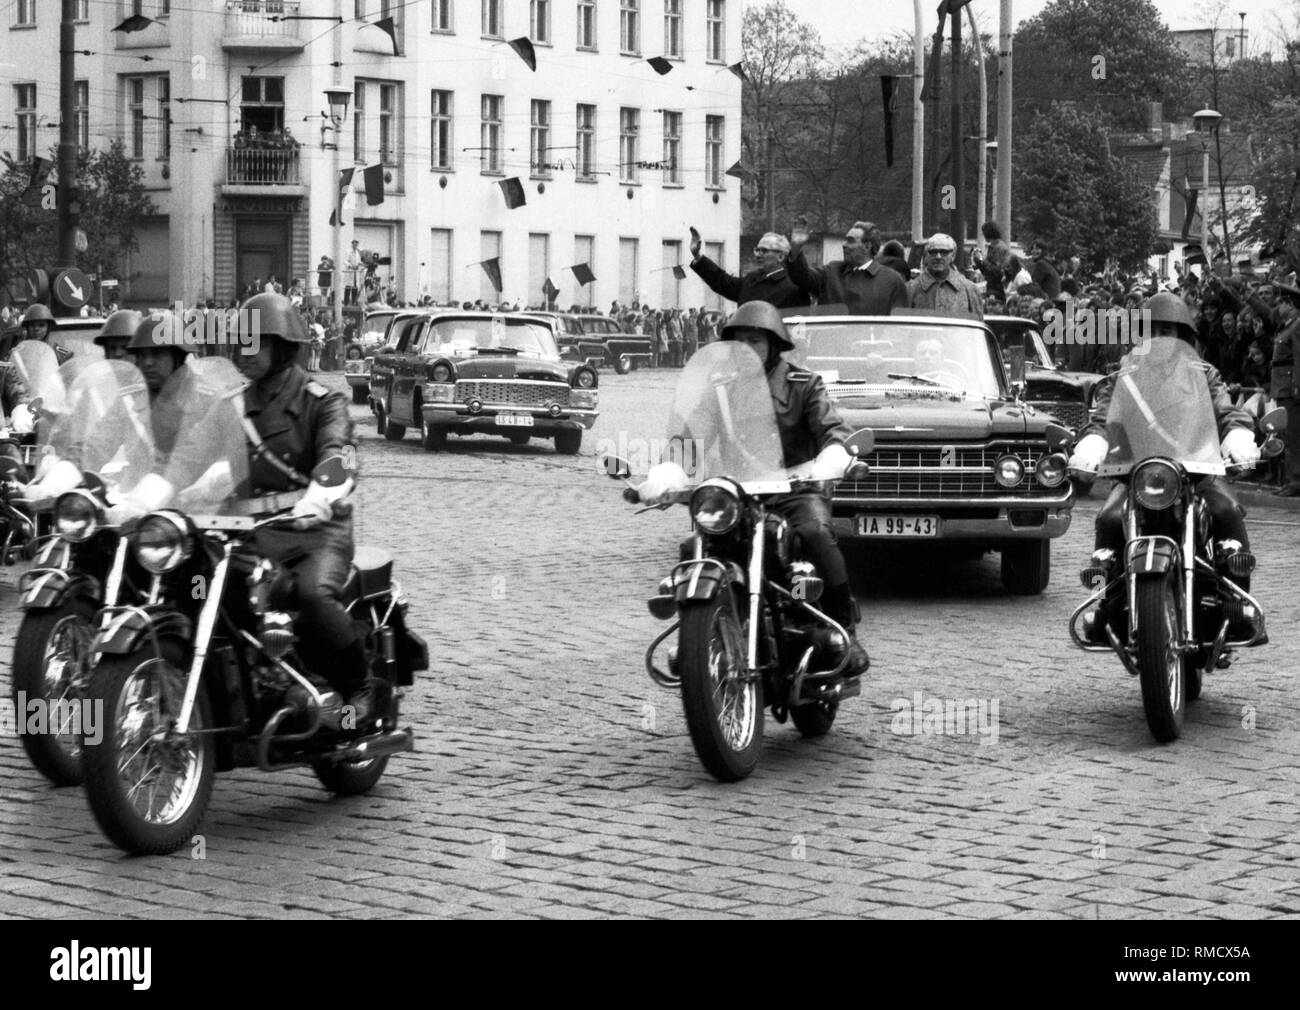 Motorcade with the Soviet party leader Leonid Brezhnev during the state visit in East Berlin in 1973 on the way to the guesthouse of the GDR government Schoenhausen Palace, accompanied by Erich Honecker and Willi Stoph, who waves to the people on the roadside from the open vehicle in the district of Pankow. Stock Photo